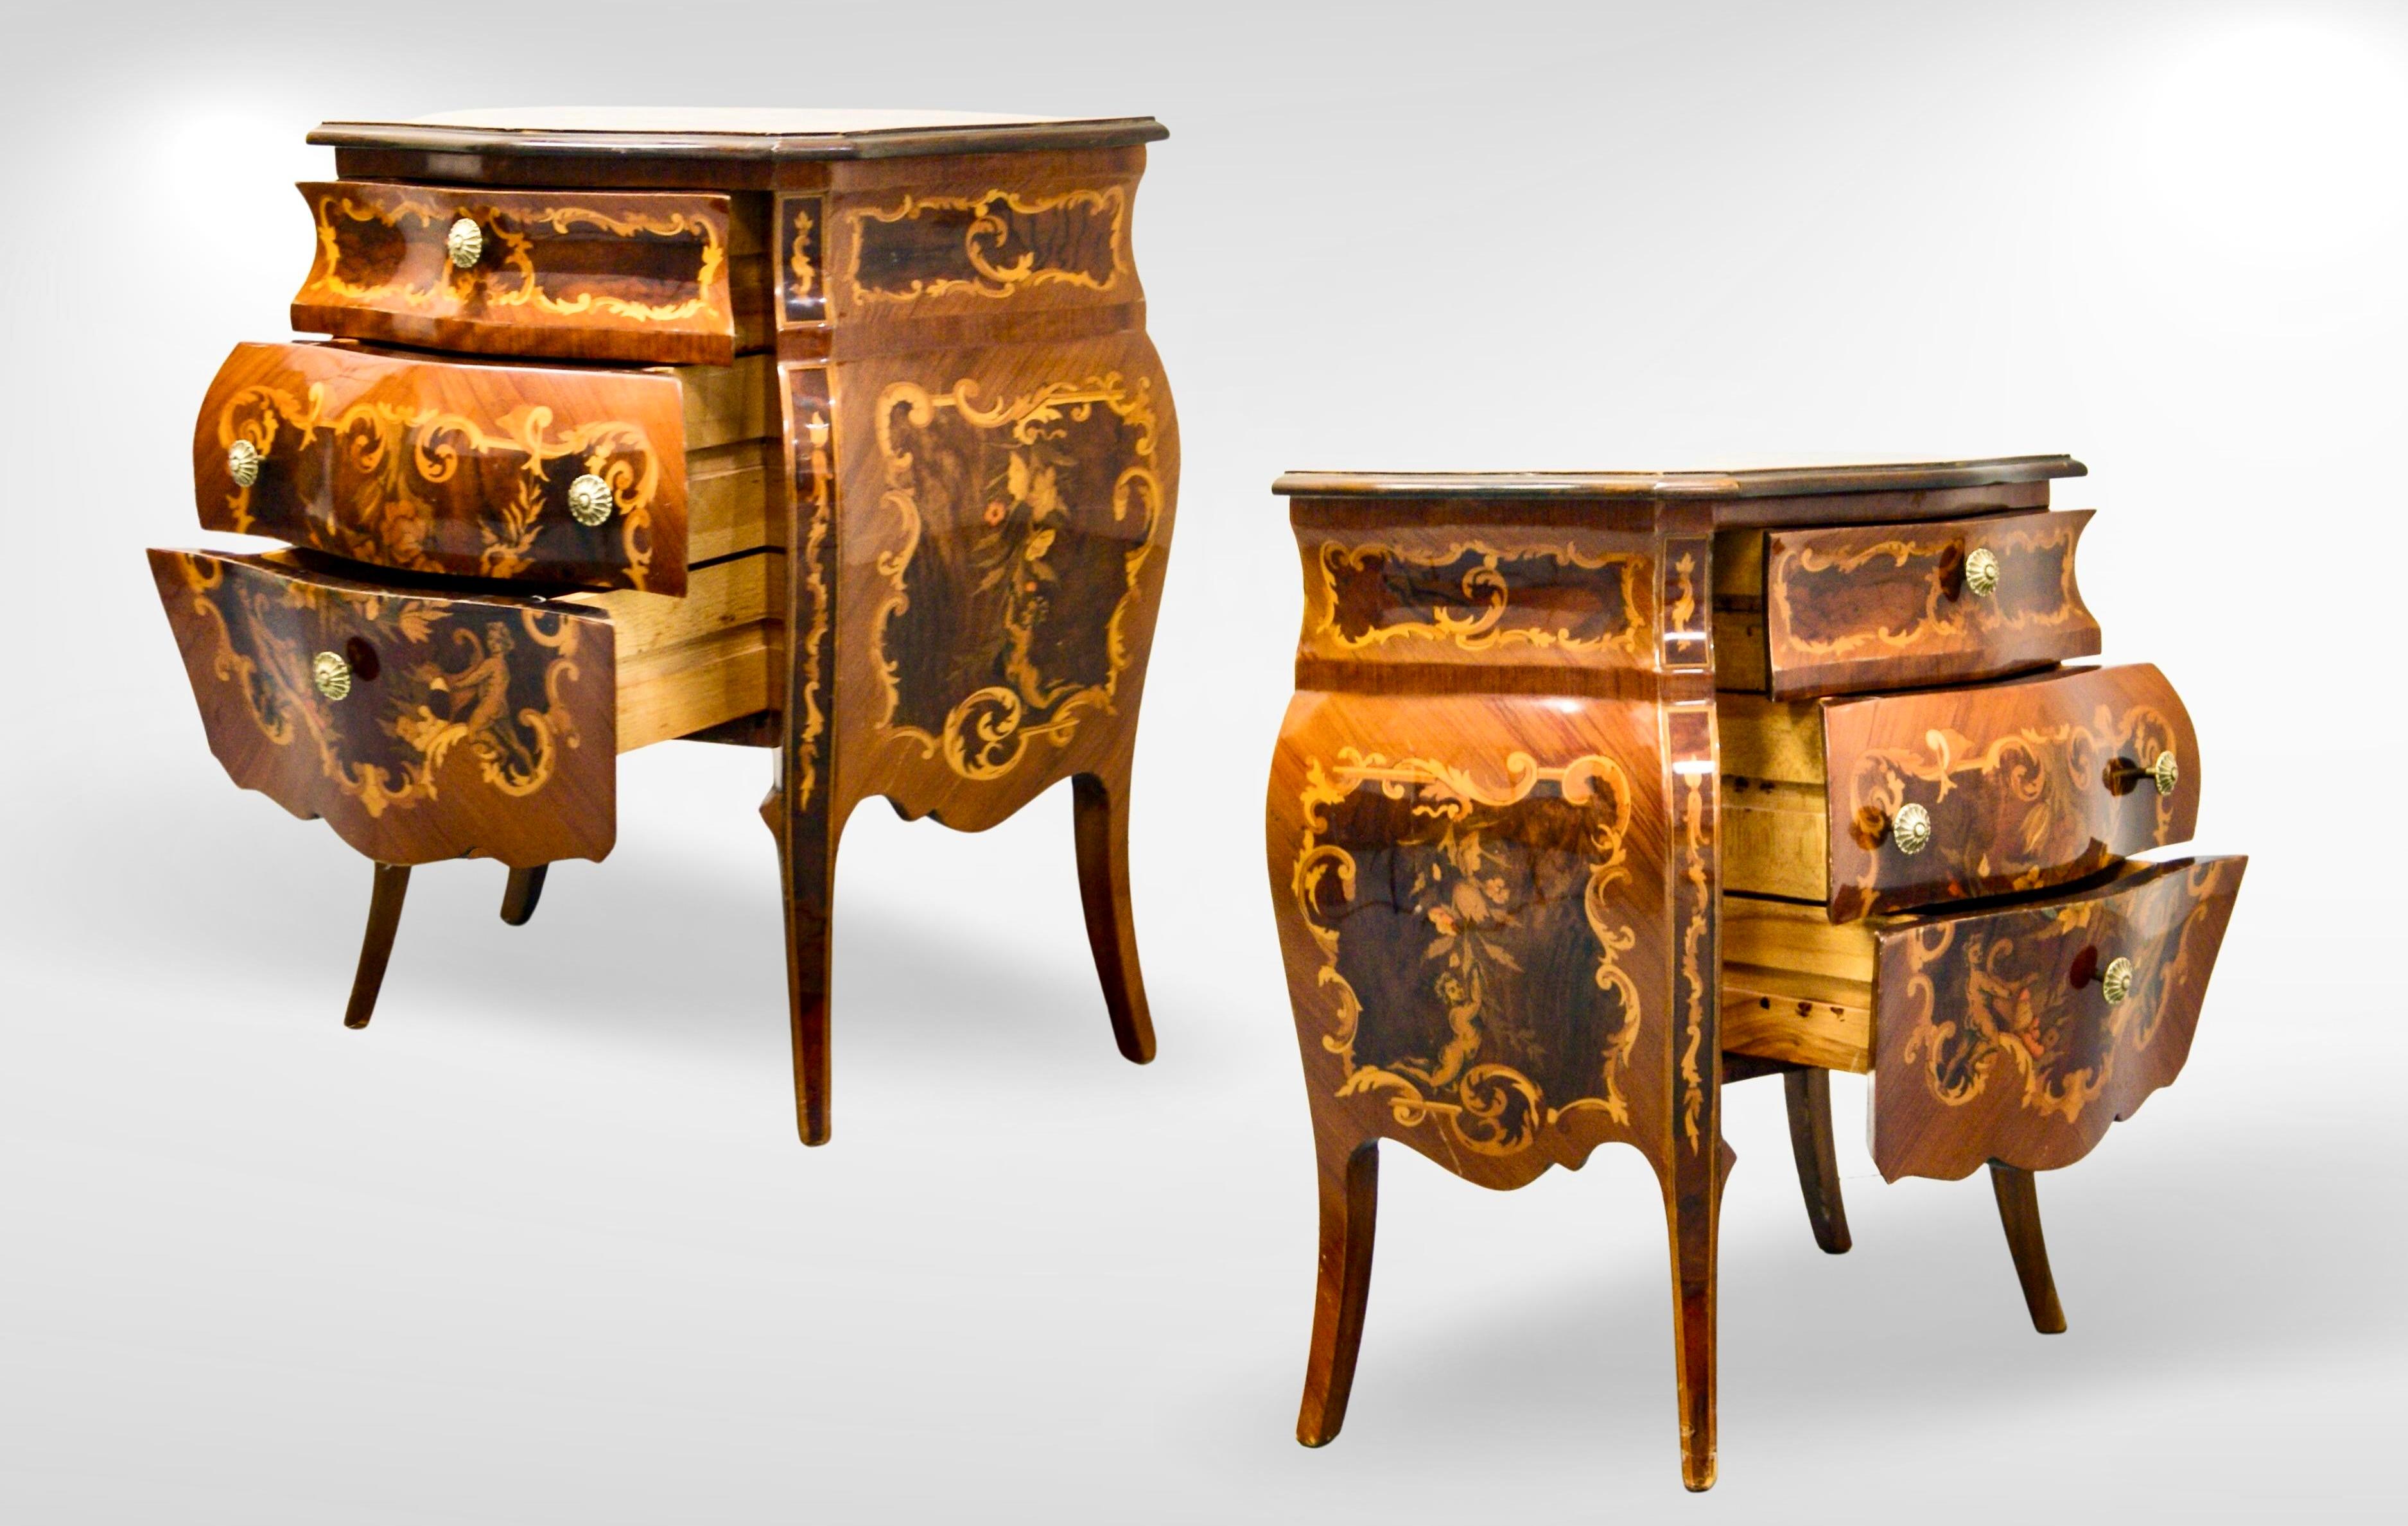 Baroque Revival Pair of Italian Mezza Luna Inlaid Marquetry Olivewood Bombe Commodes For Sale